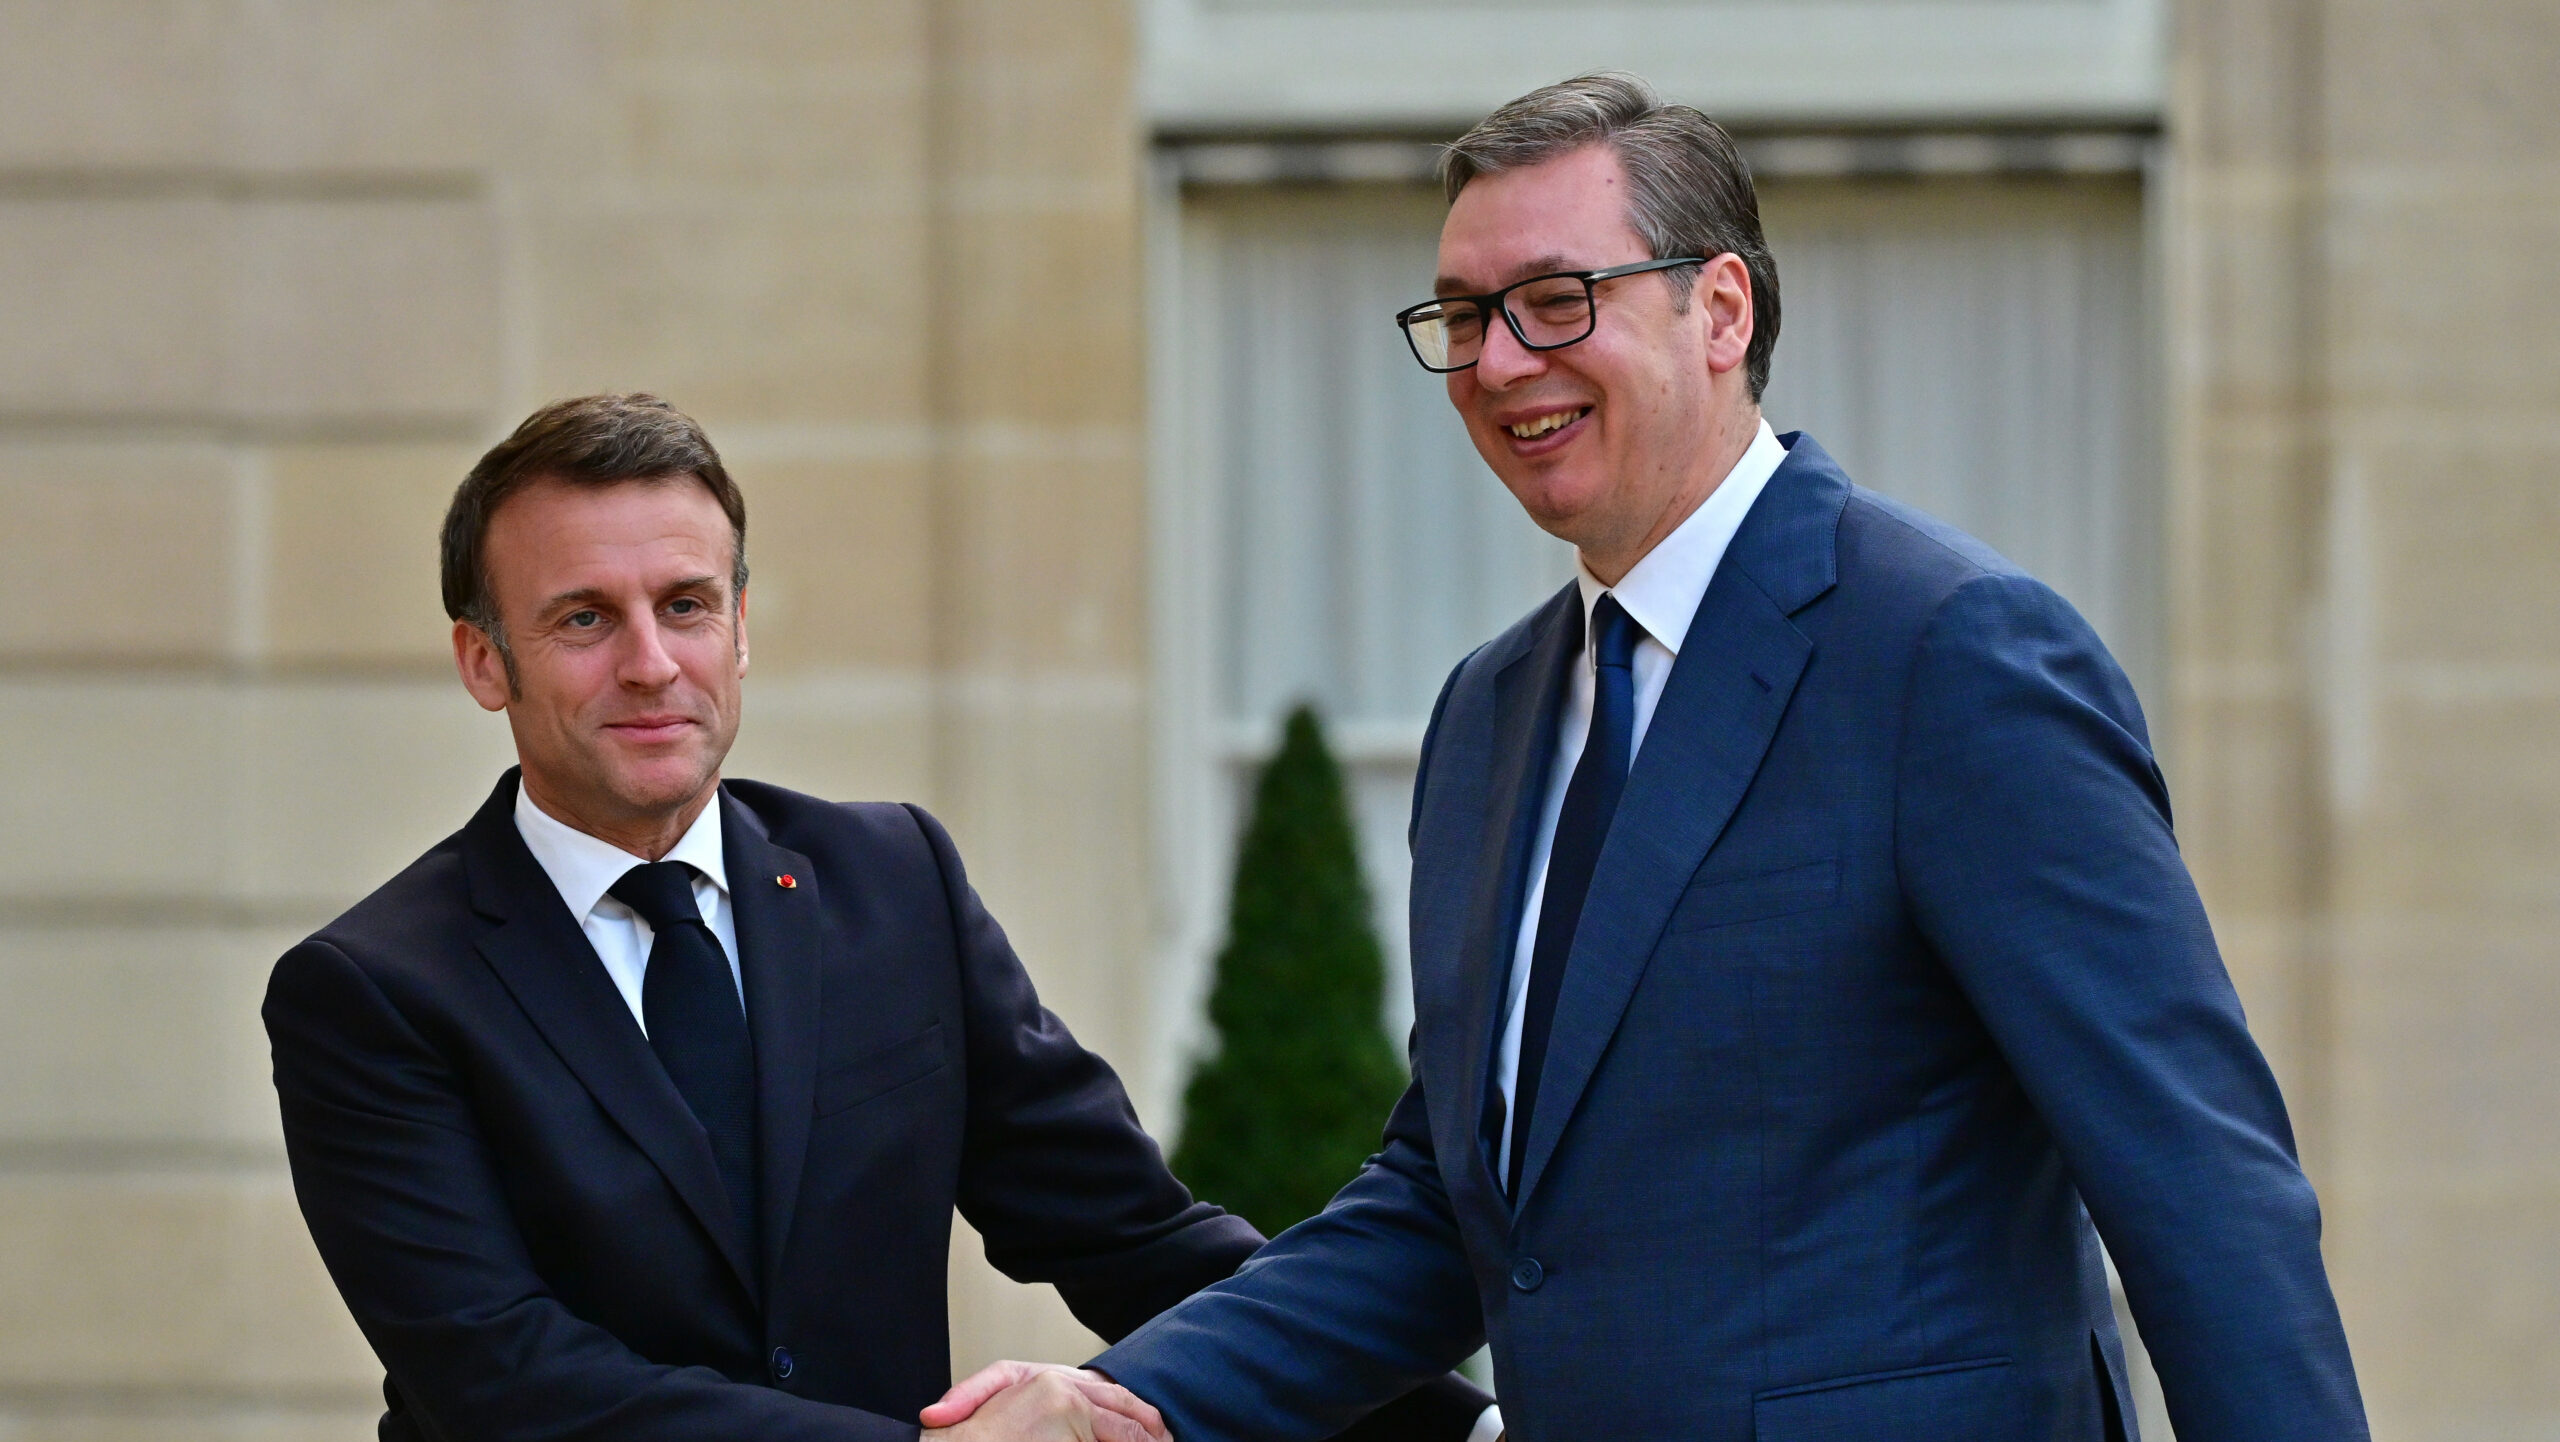 Serbia on verge of closing Rafale fighter jet order from France: President Vucic